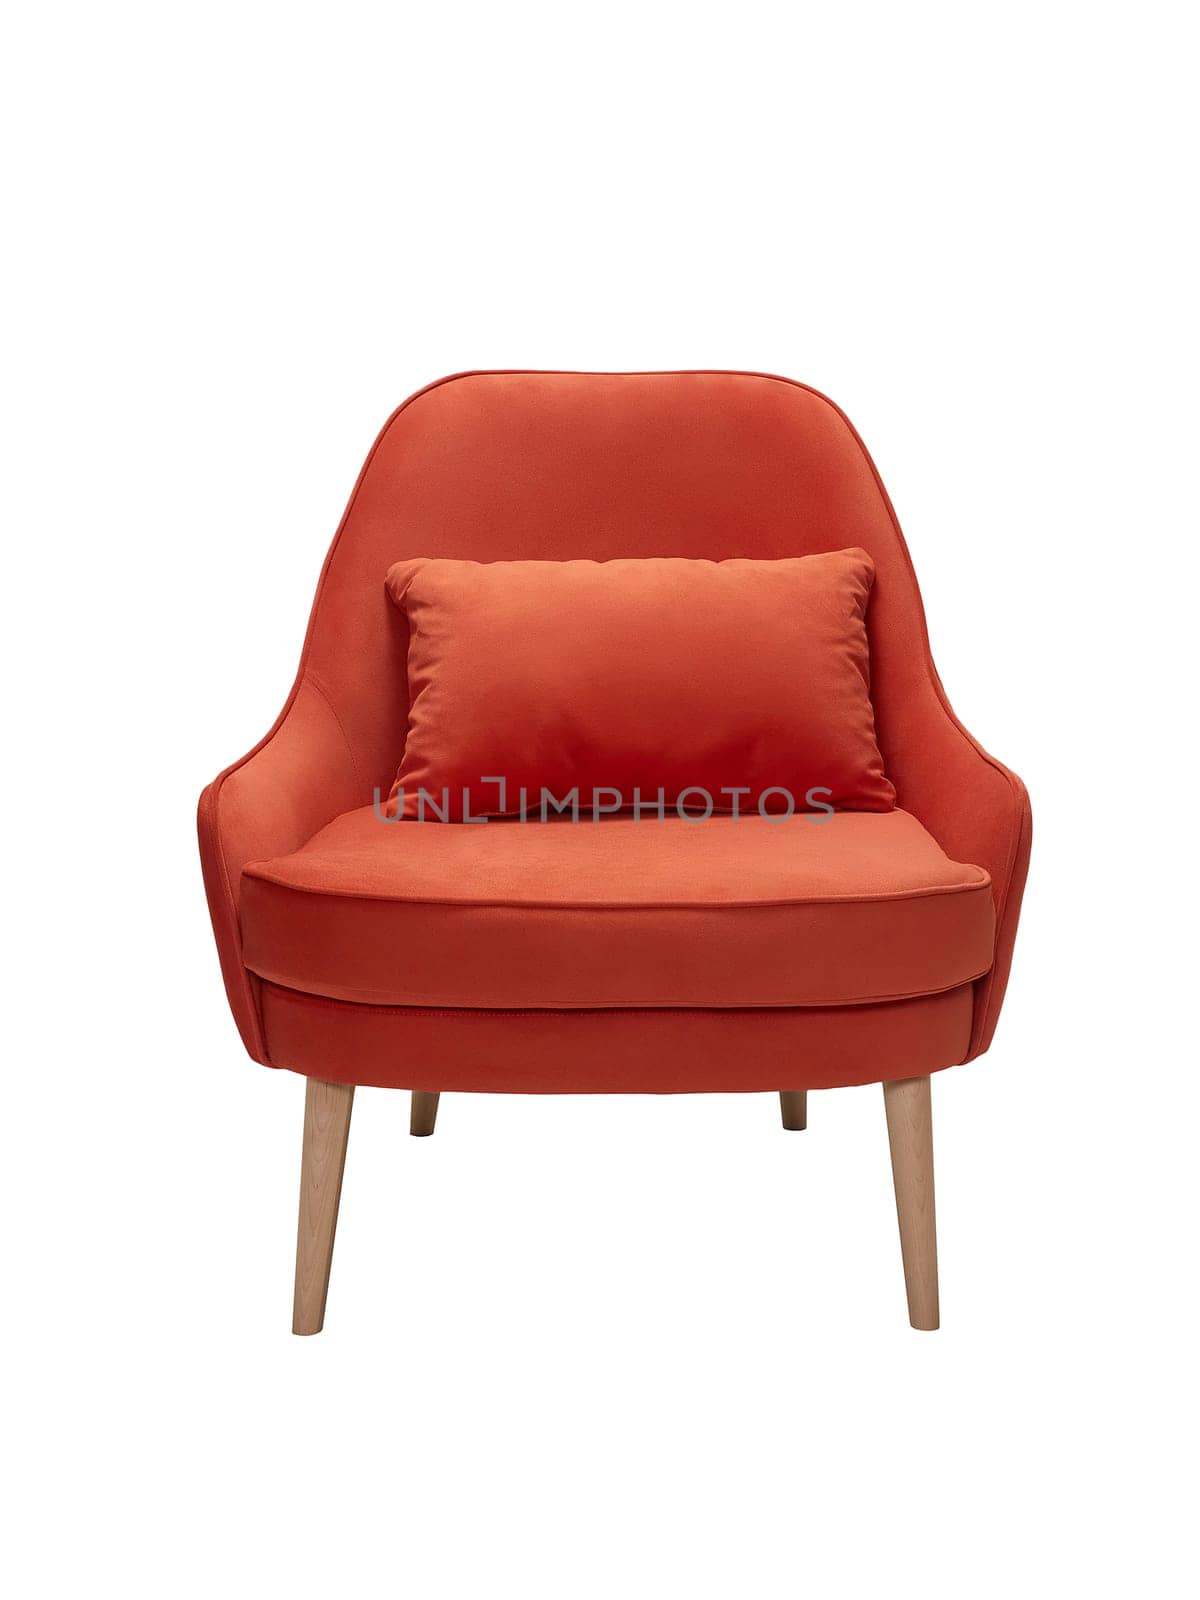 modern red fabric armchair with wooden legs isolated on white background, front view.